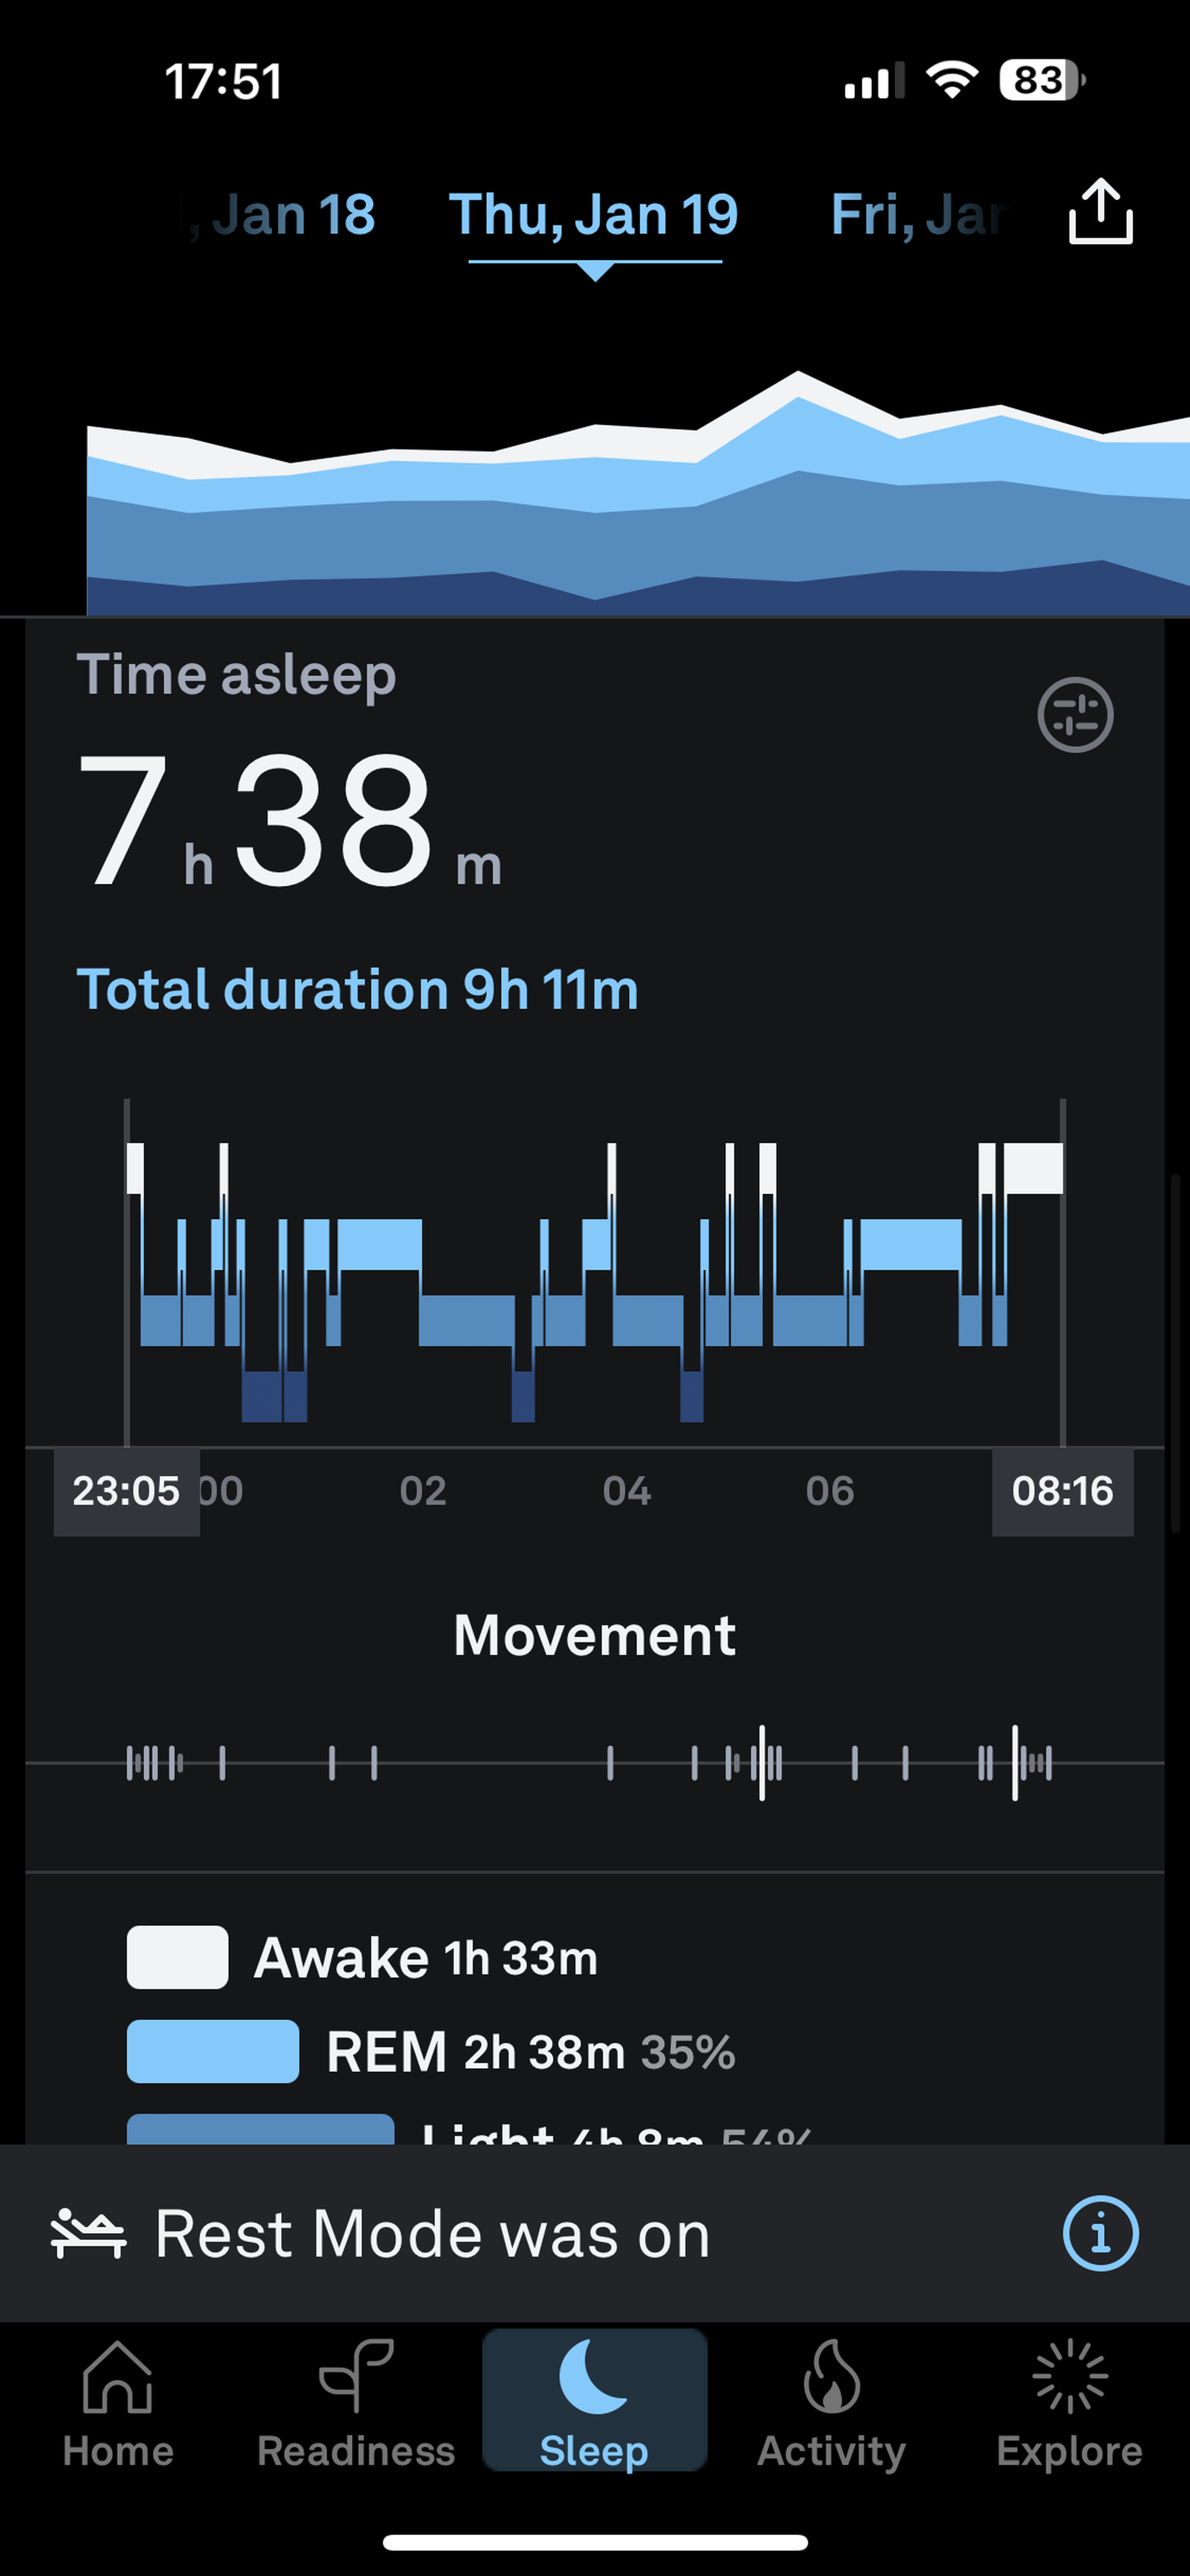 The same day as the previous slide from the Oura Ring app, showing fewer sleep disturbances and an awake time of 1 hour, 33 minutes.